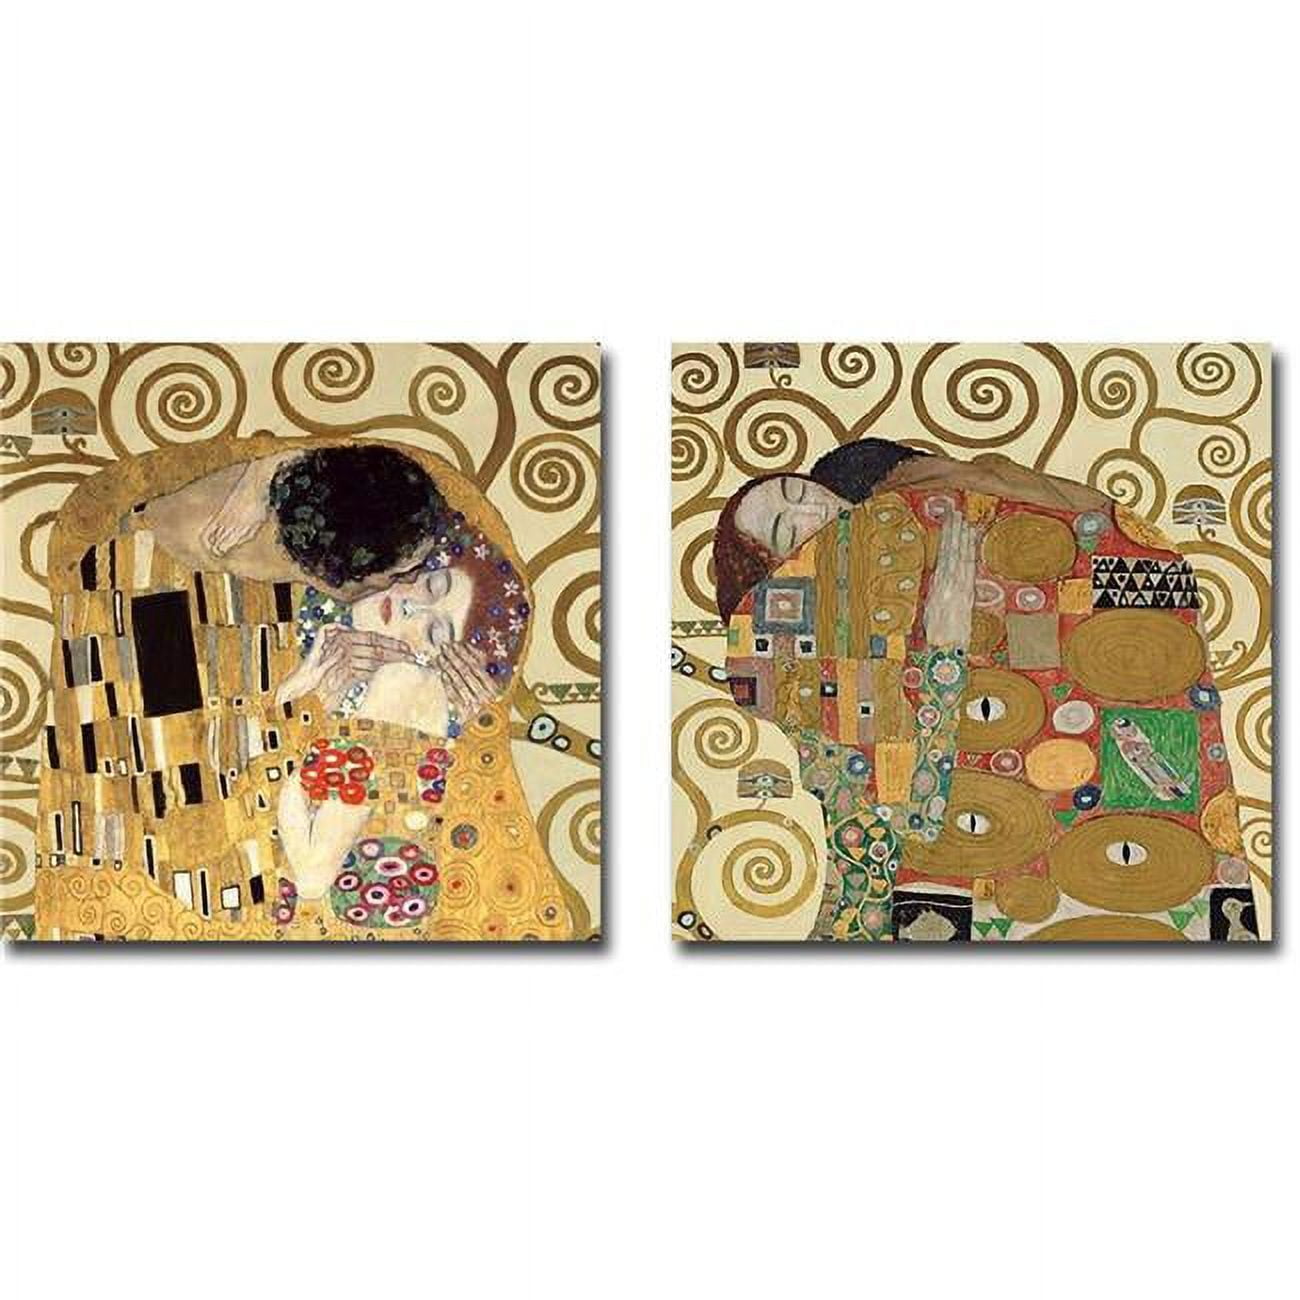 1212n504sag The Kiss & The Embrace By Gustav Klimt 2-piece Premium Gallery-wrapped Canvas Giclee Art Set - 12 X 12 X 1.5 In.